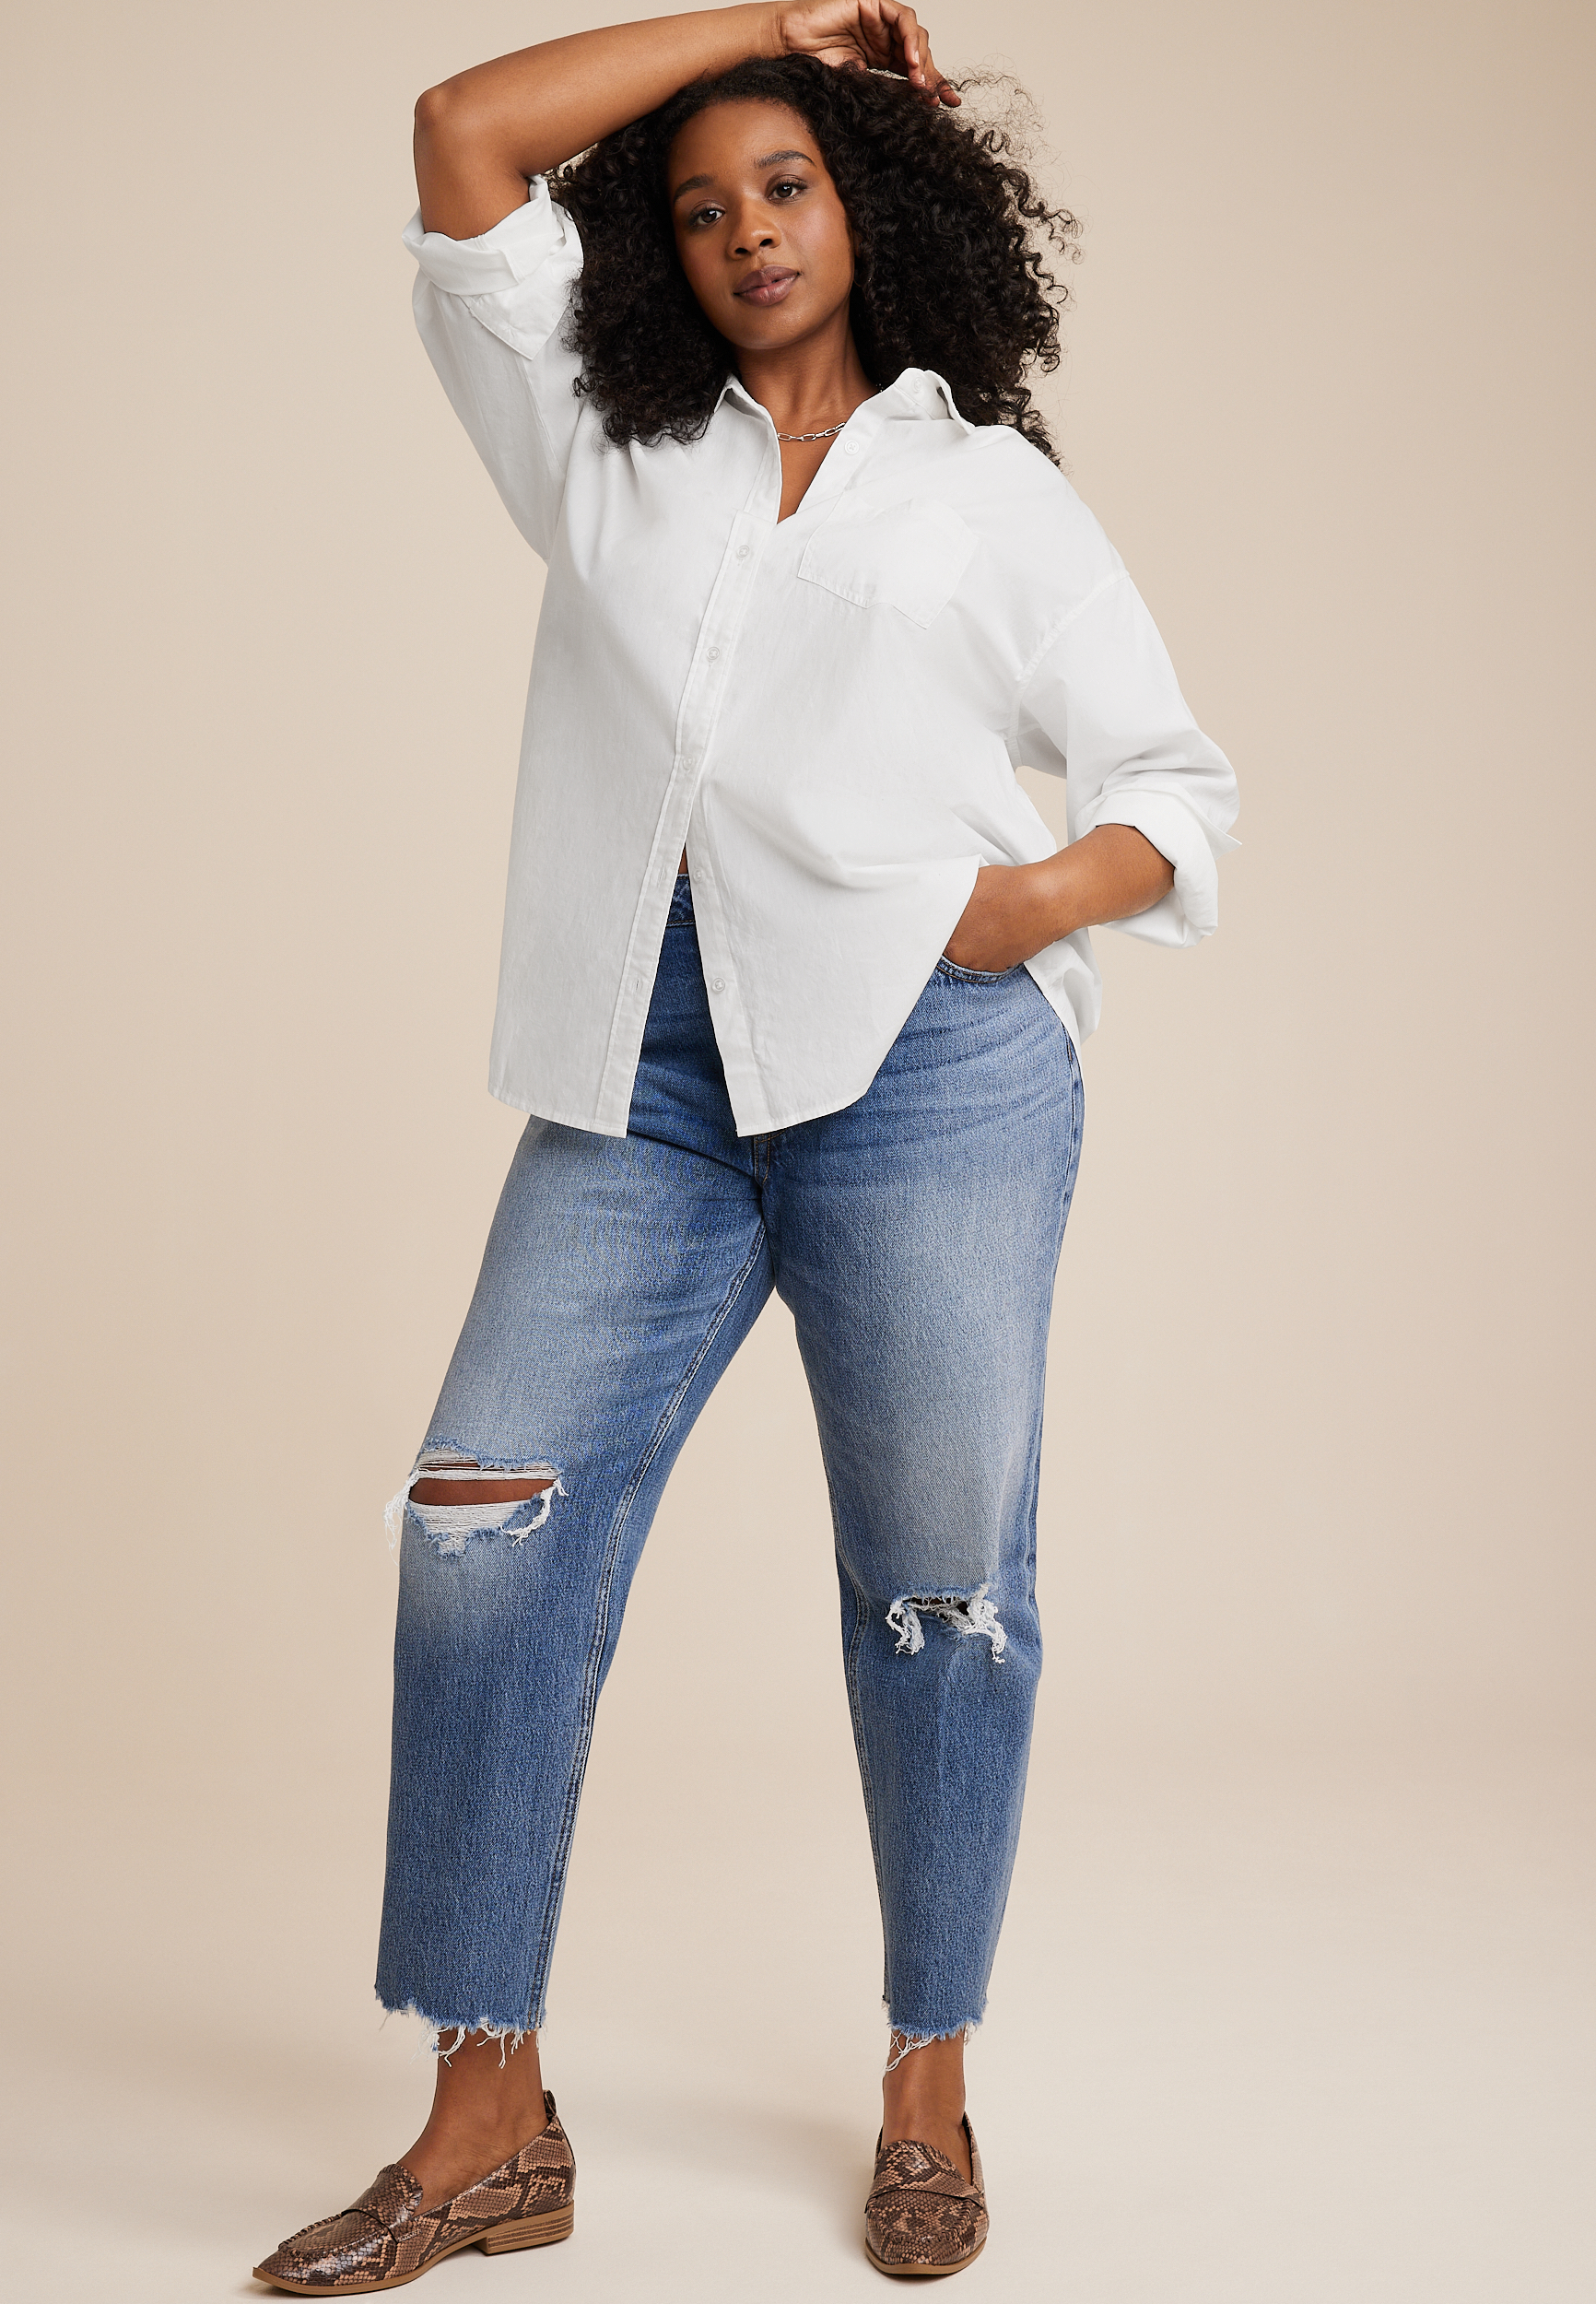 Plus Size White Cotton Button Up Shirt | maurices